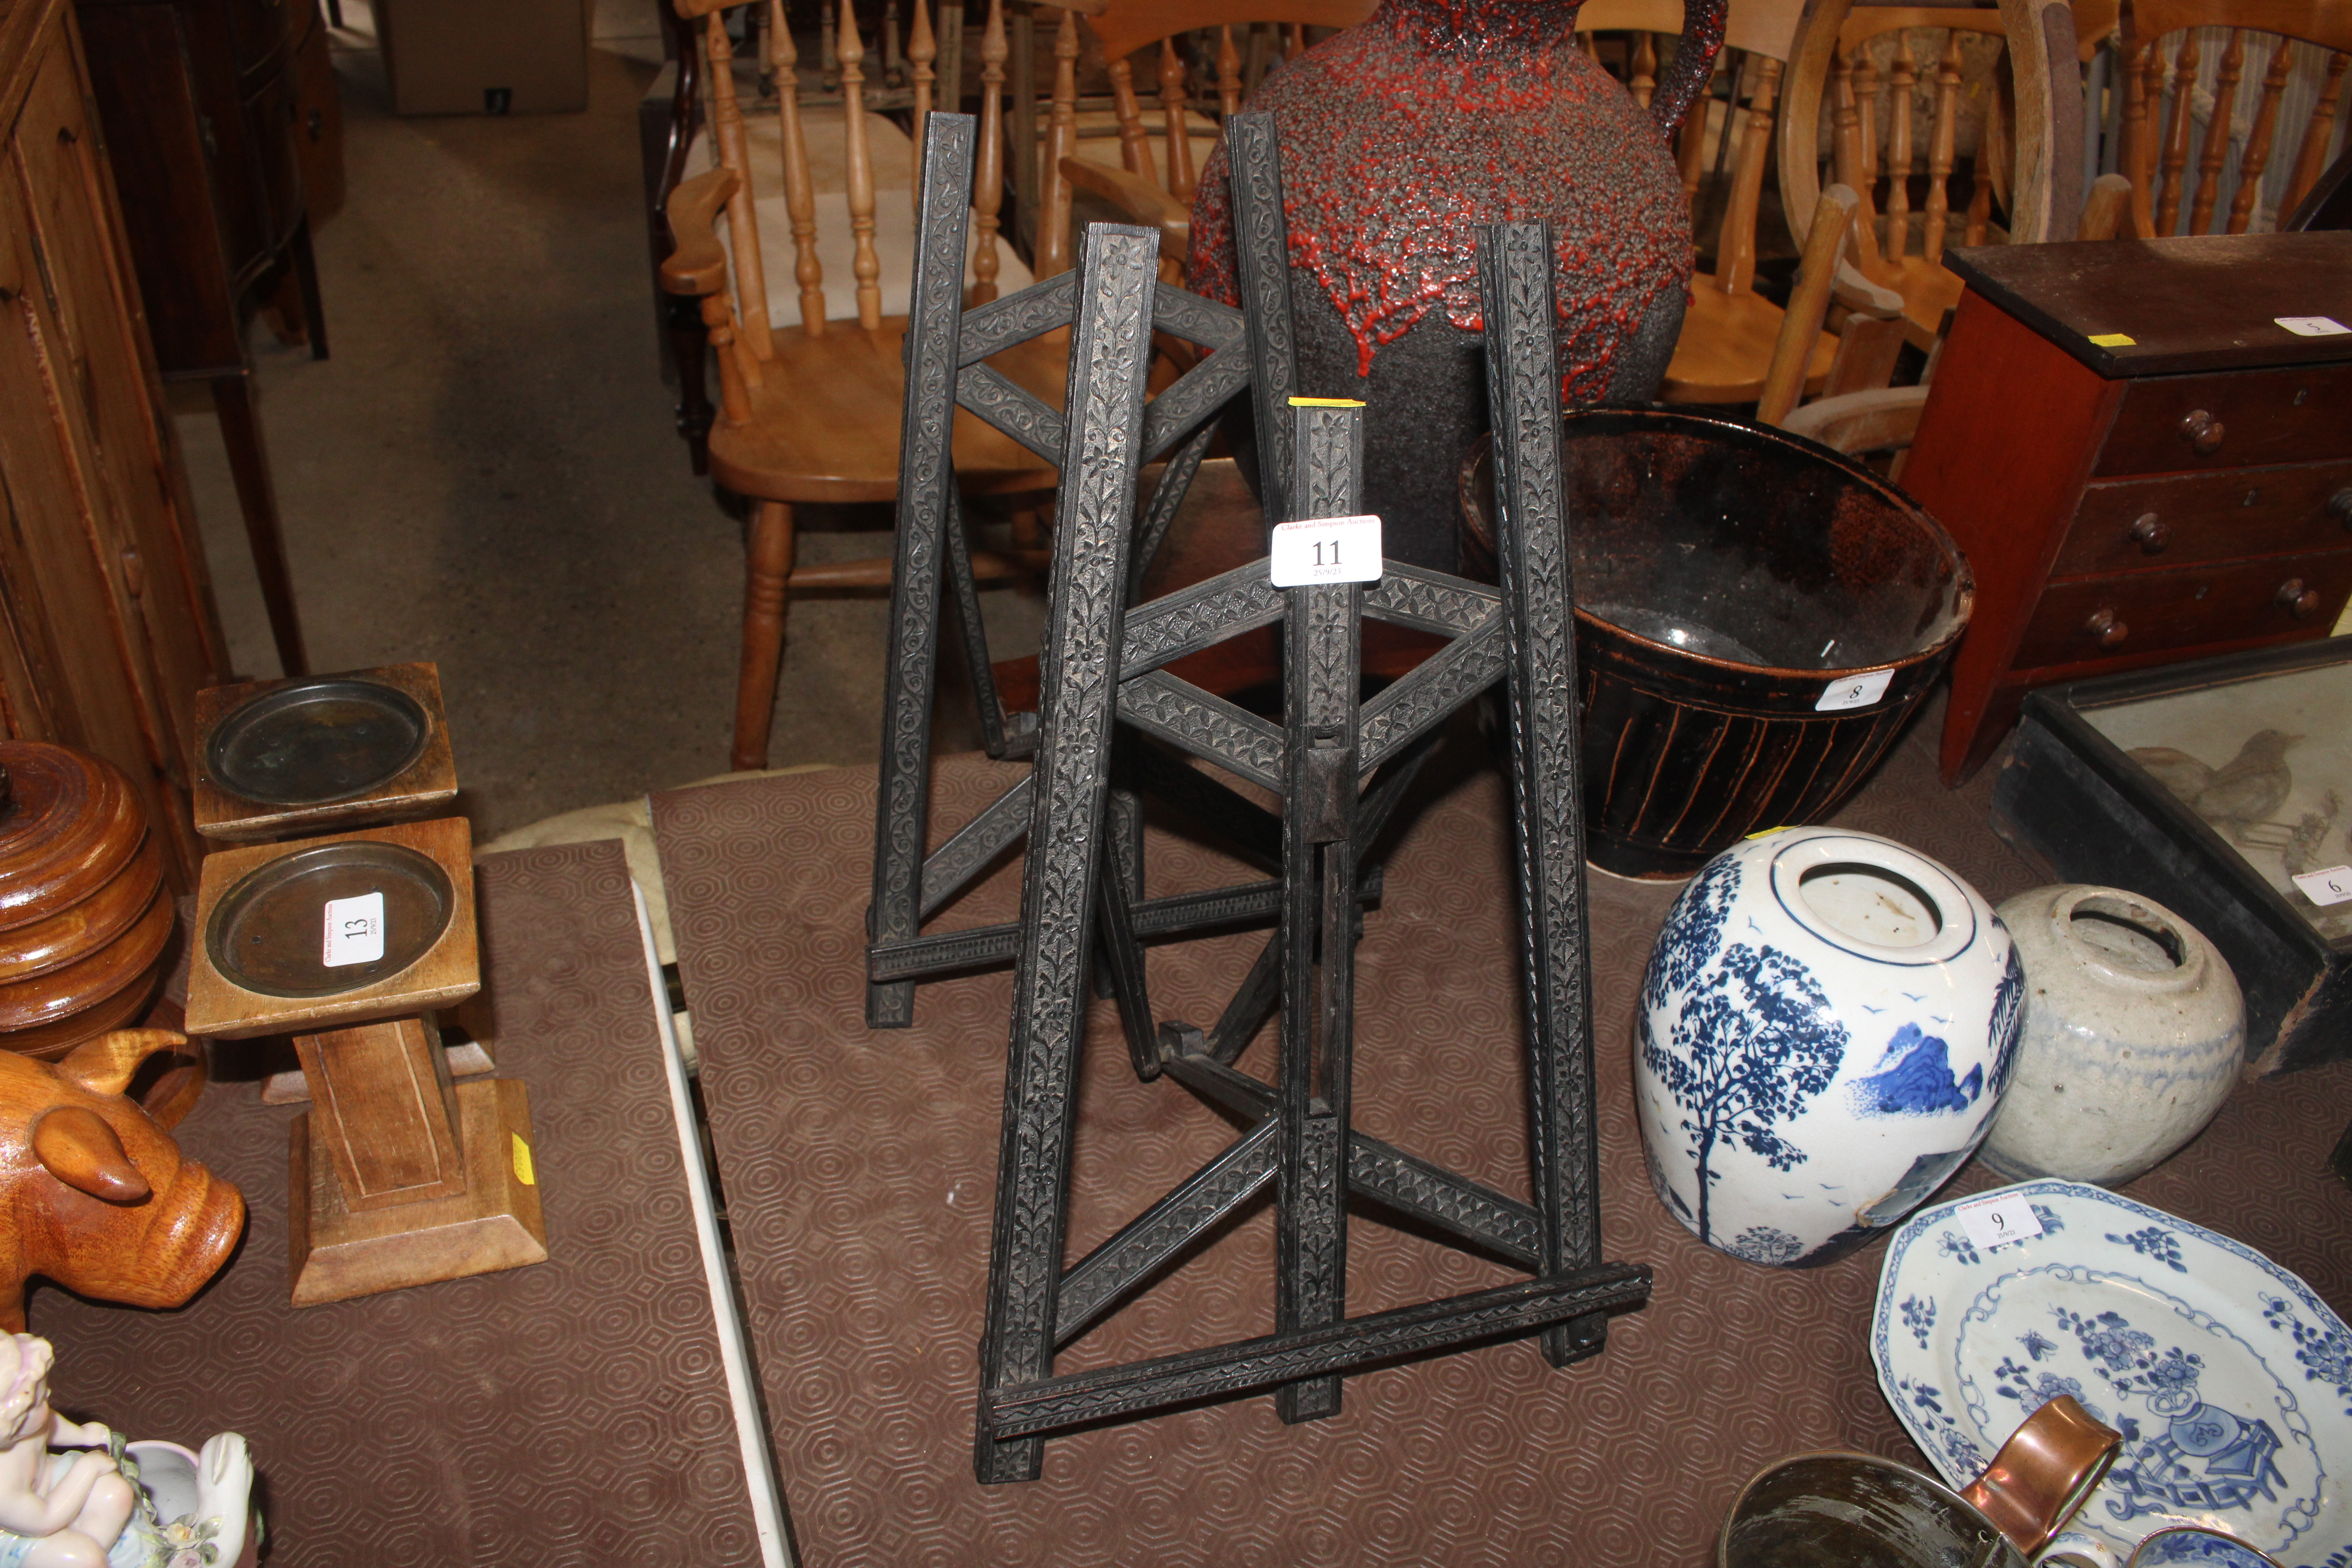 Two carved ebony music stands